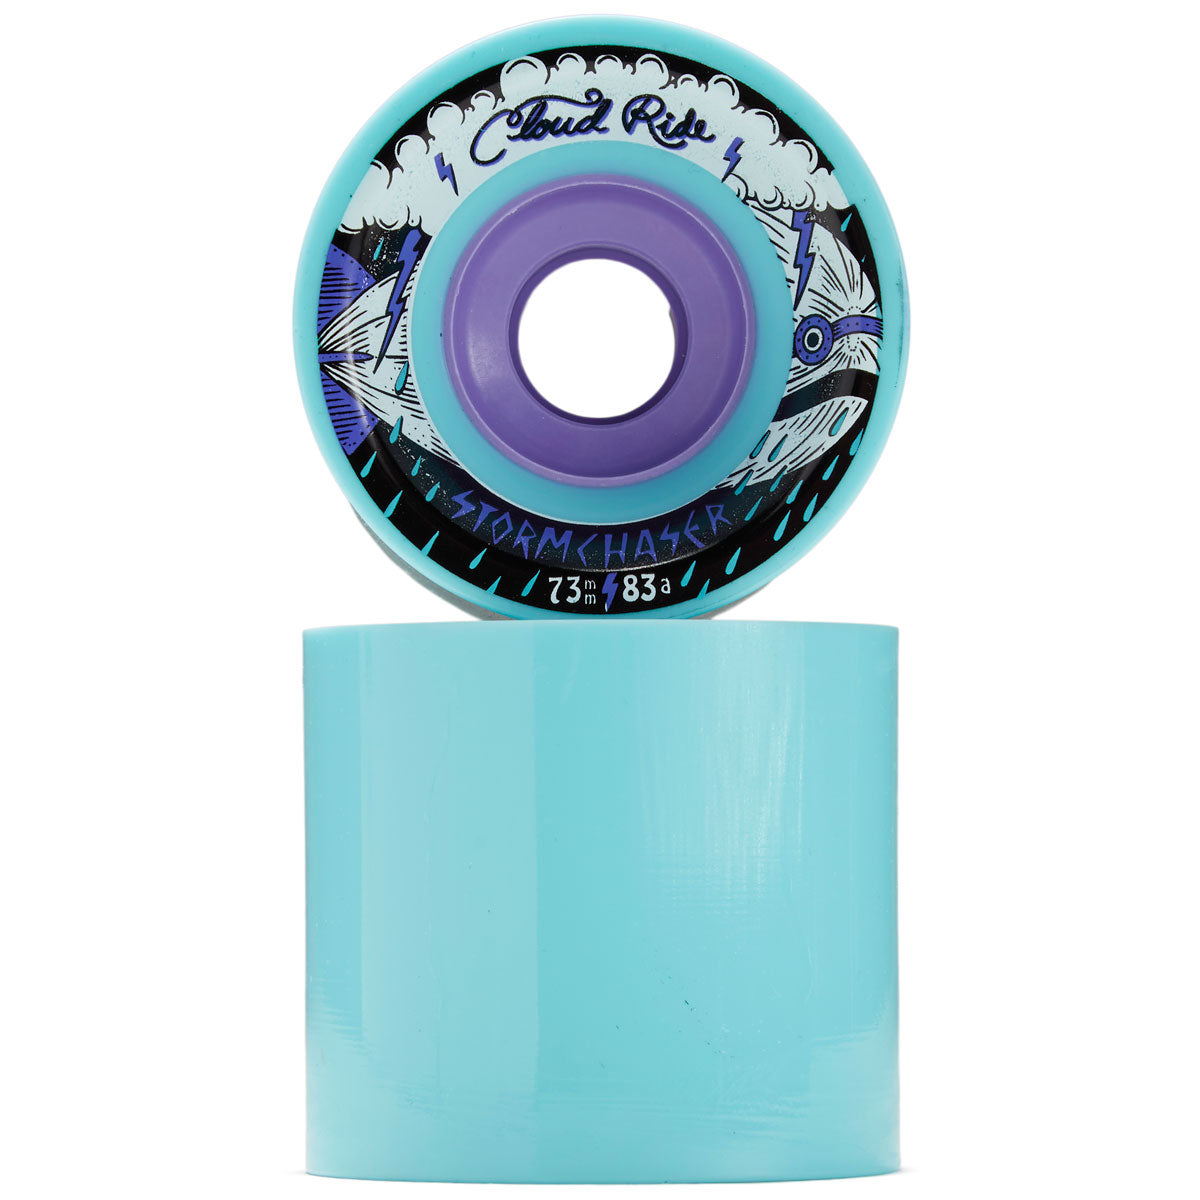 Cloud Ride Storm Chasers 83a Longboard Wheels - Blue - 73mm image 2